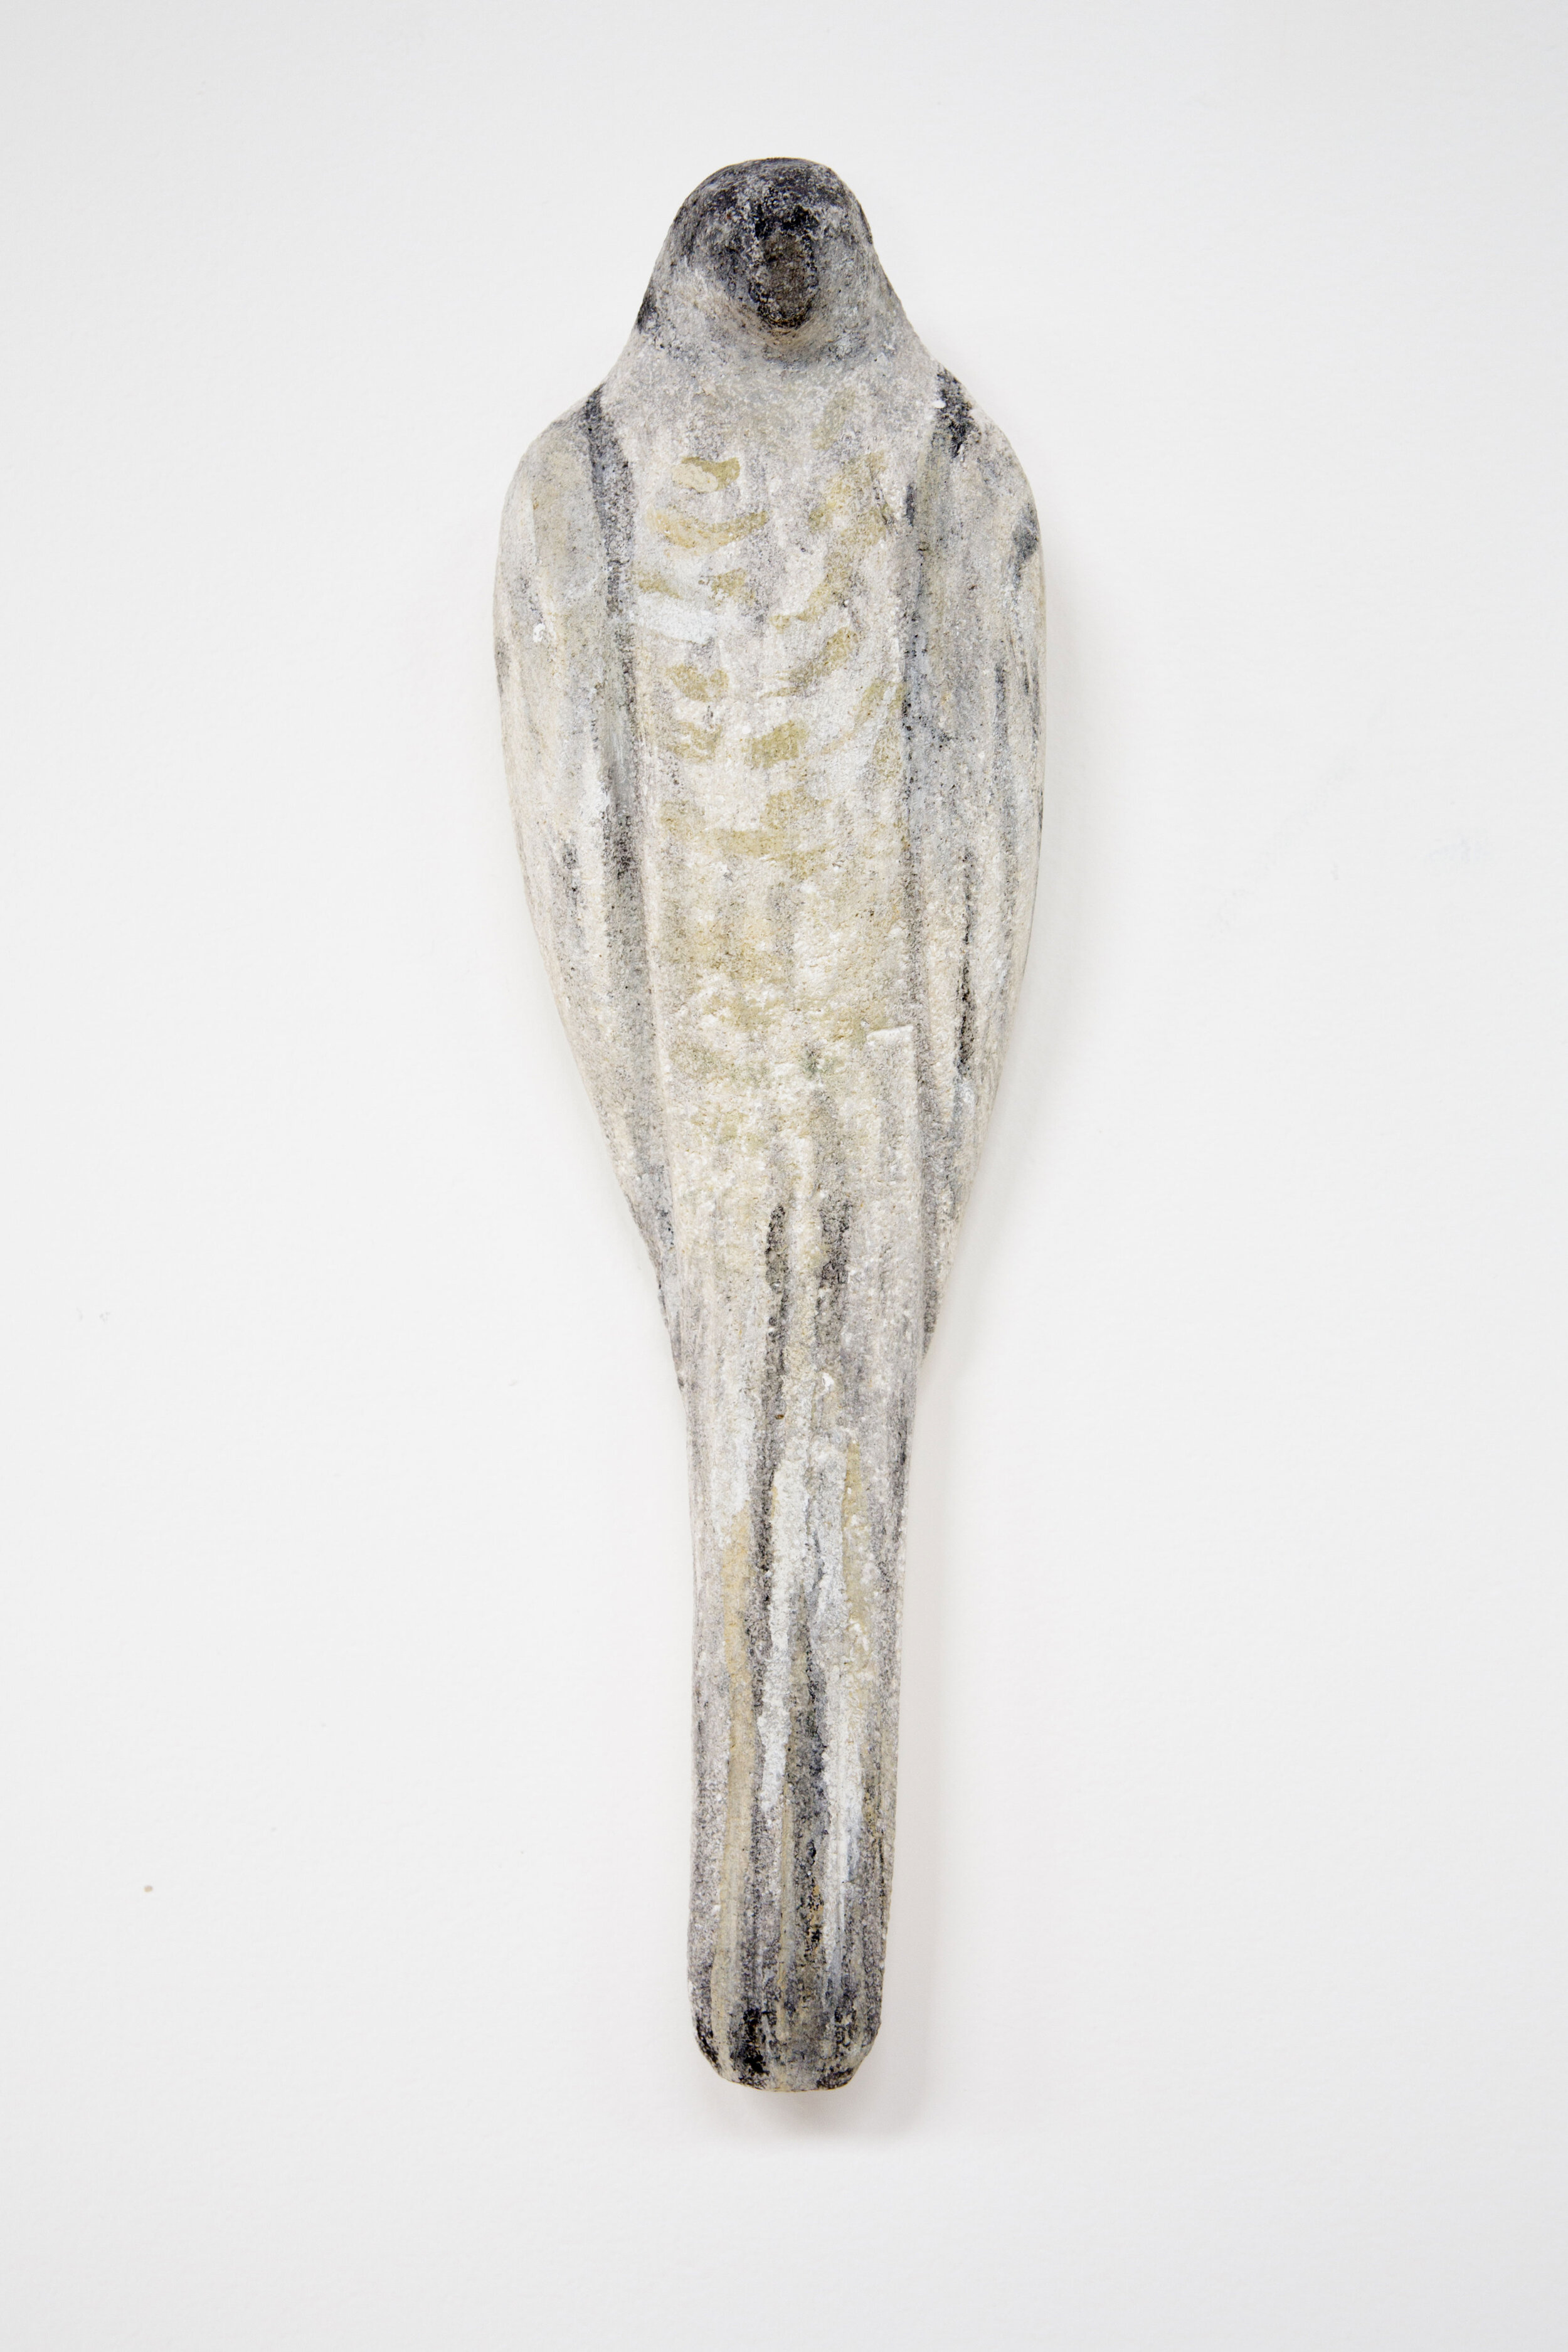  “Paterson Wall Bird,” 2019  Limestone, pigment and sumi ink  13 x 4 x 3 inches 